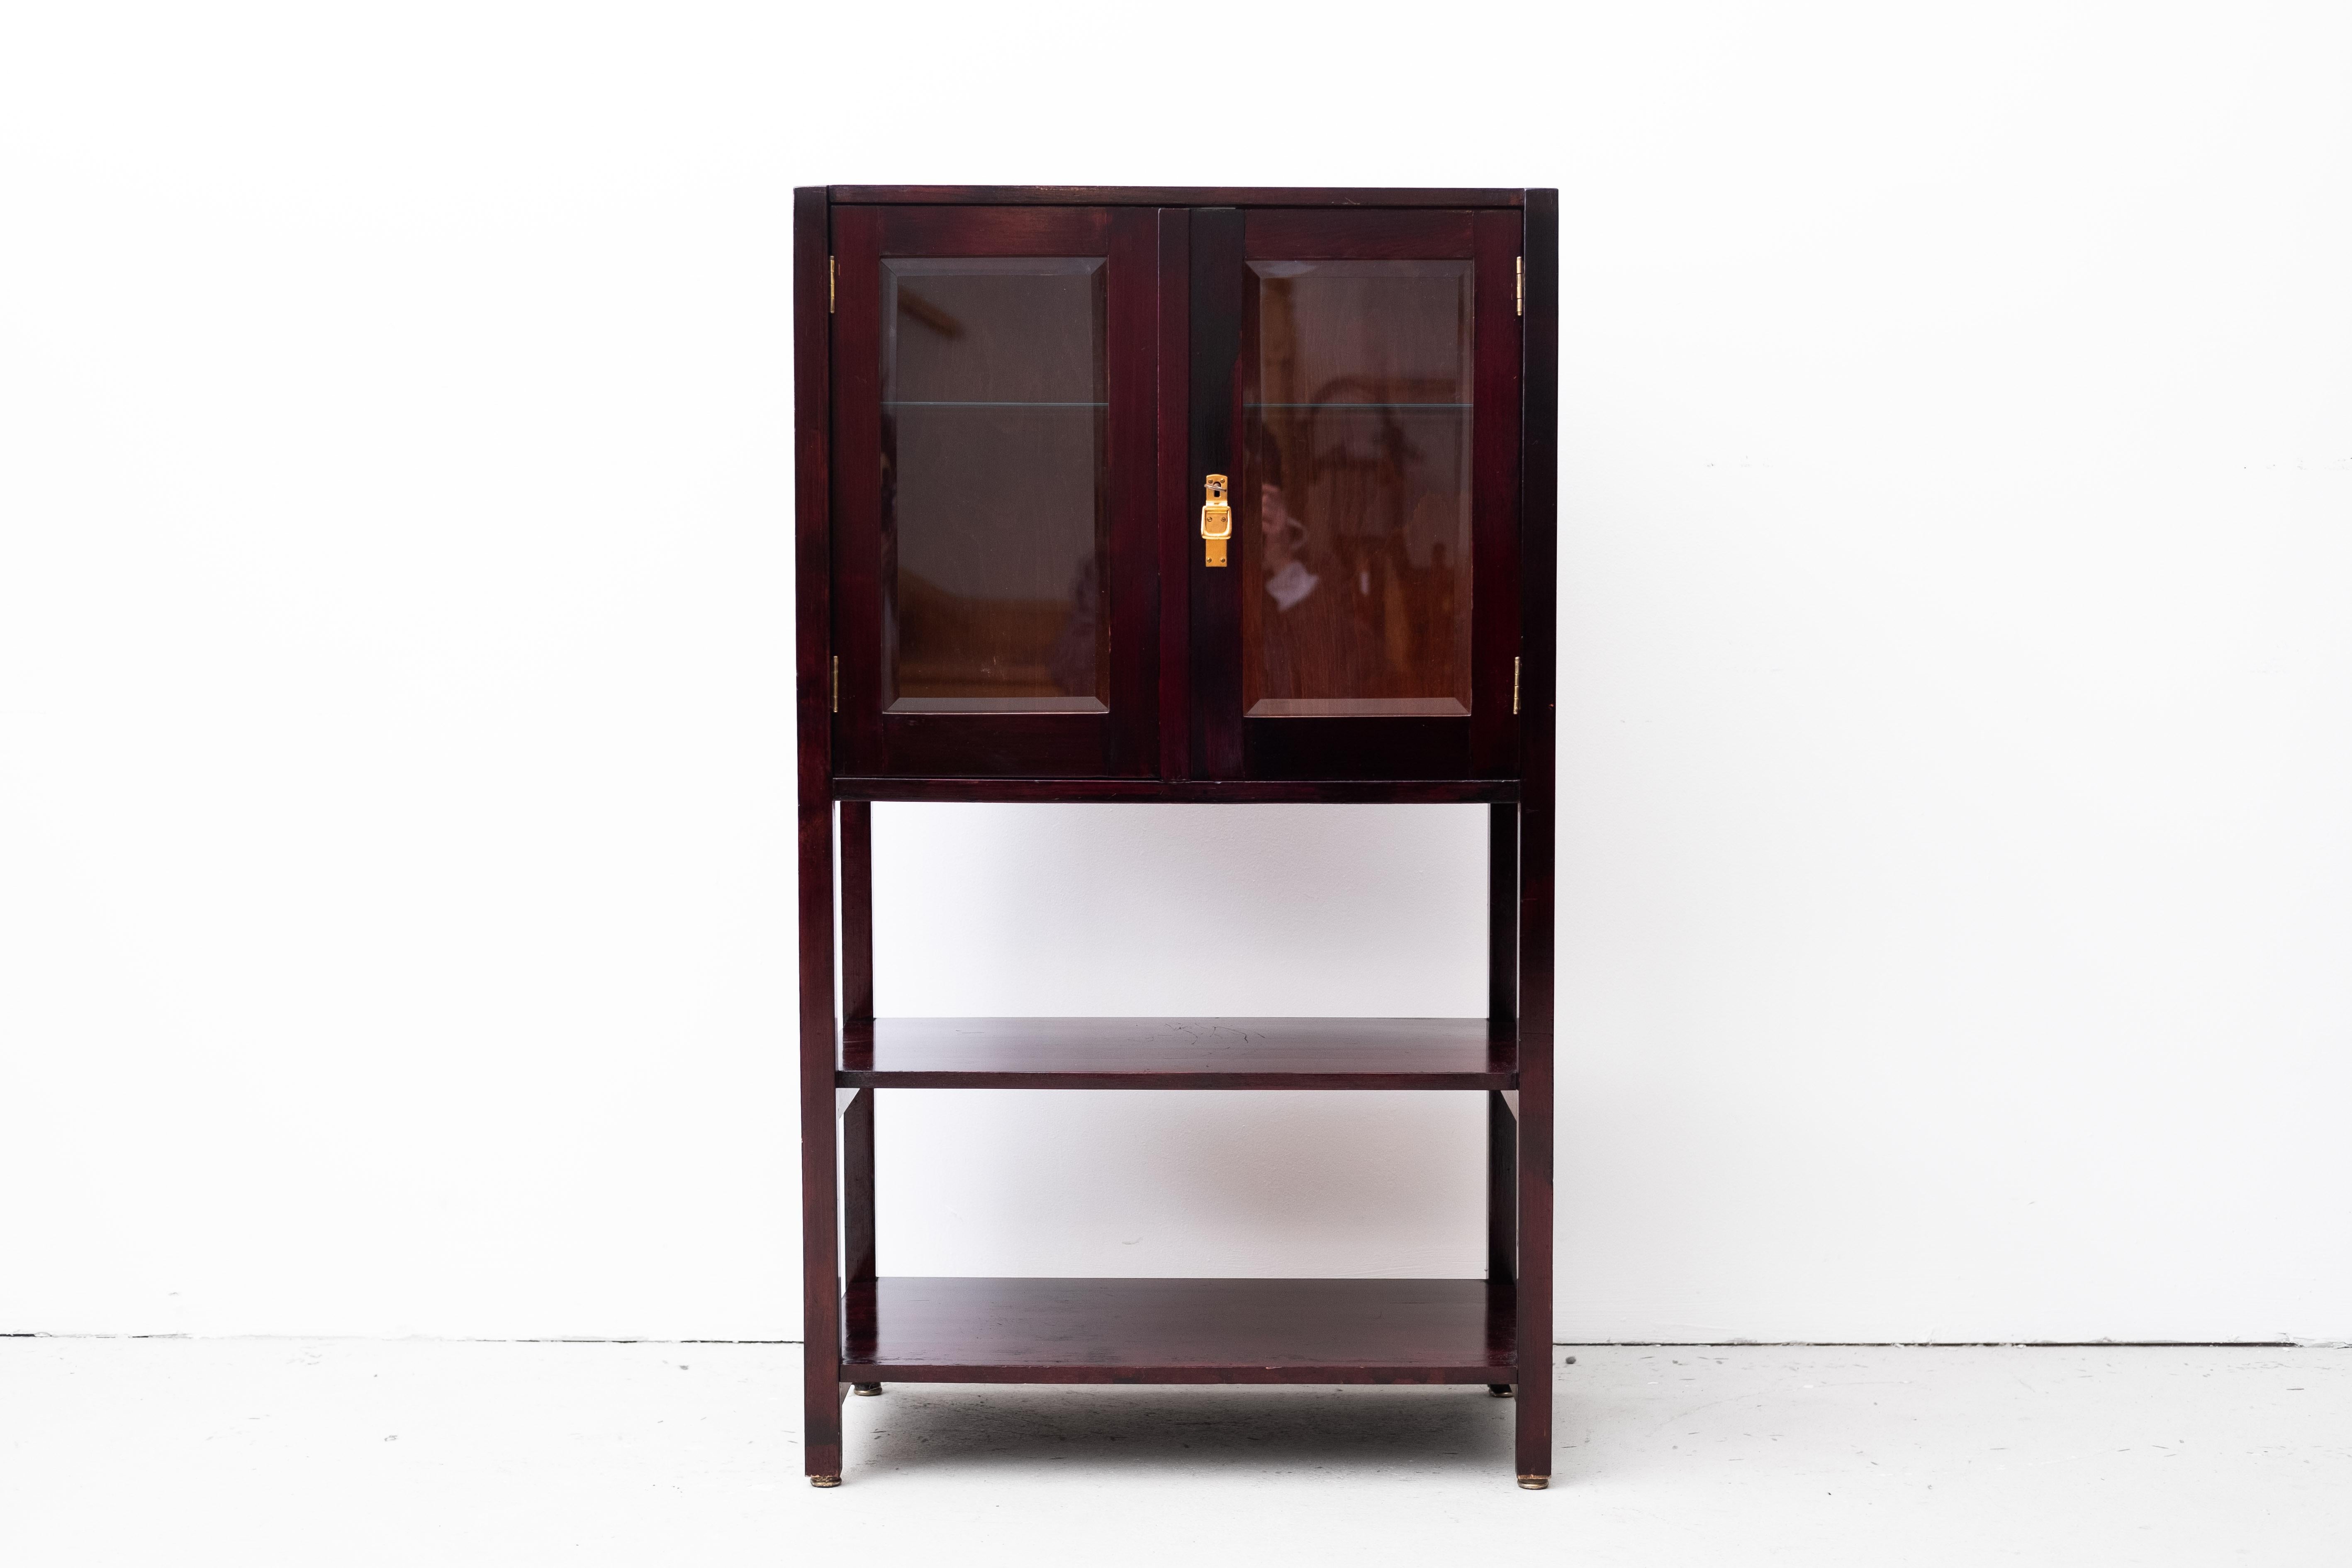 Austrian Small Art Nouveau Cabinet by Thonet Brothers (Vienna, 1910) For Sale